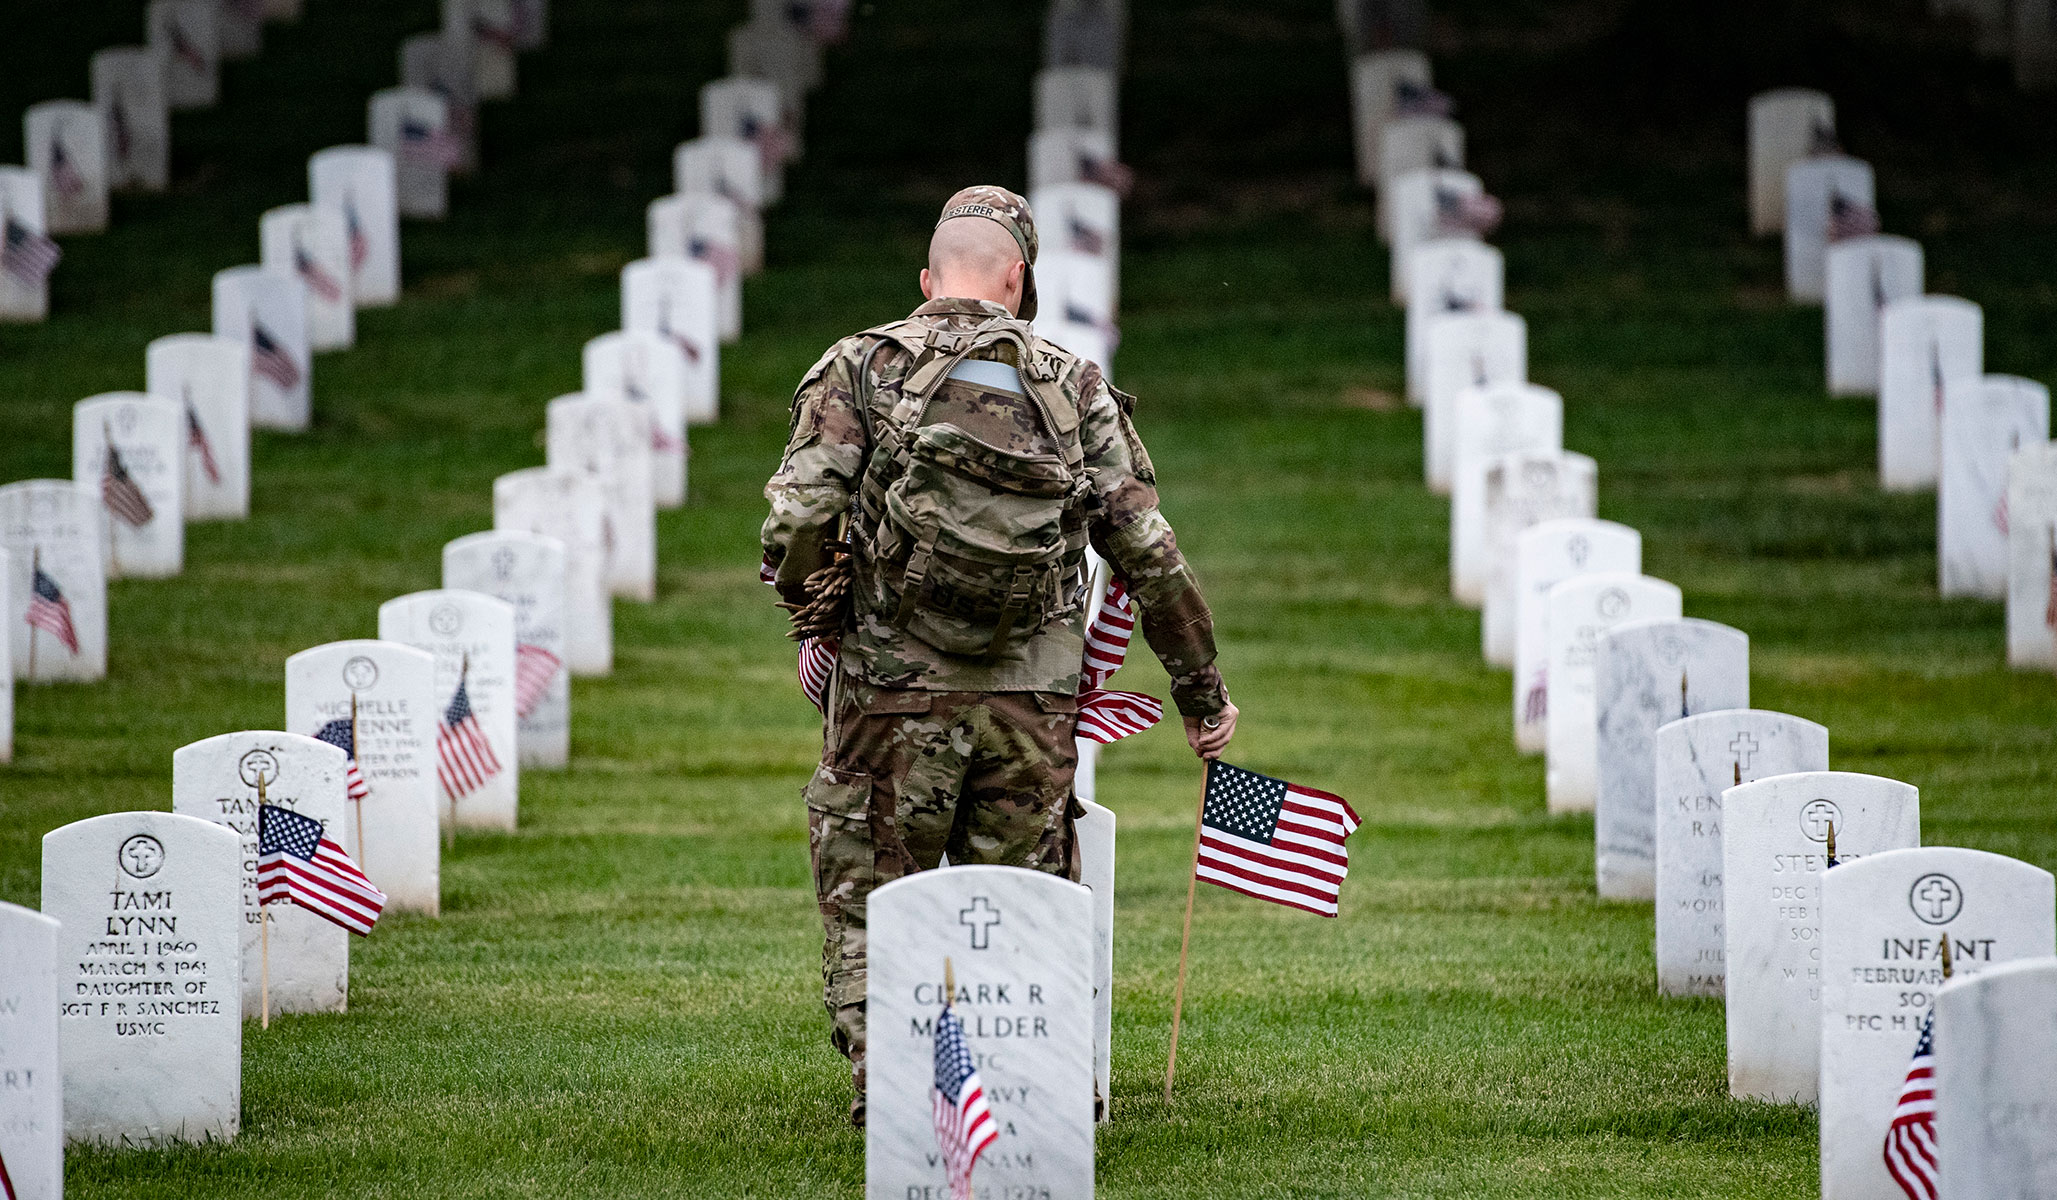 Memorial Day Is More Than Just the Start of Summer | National Review